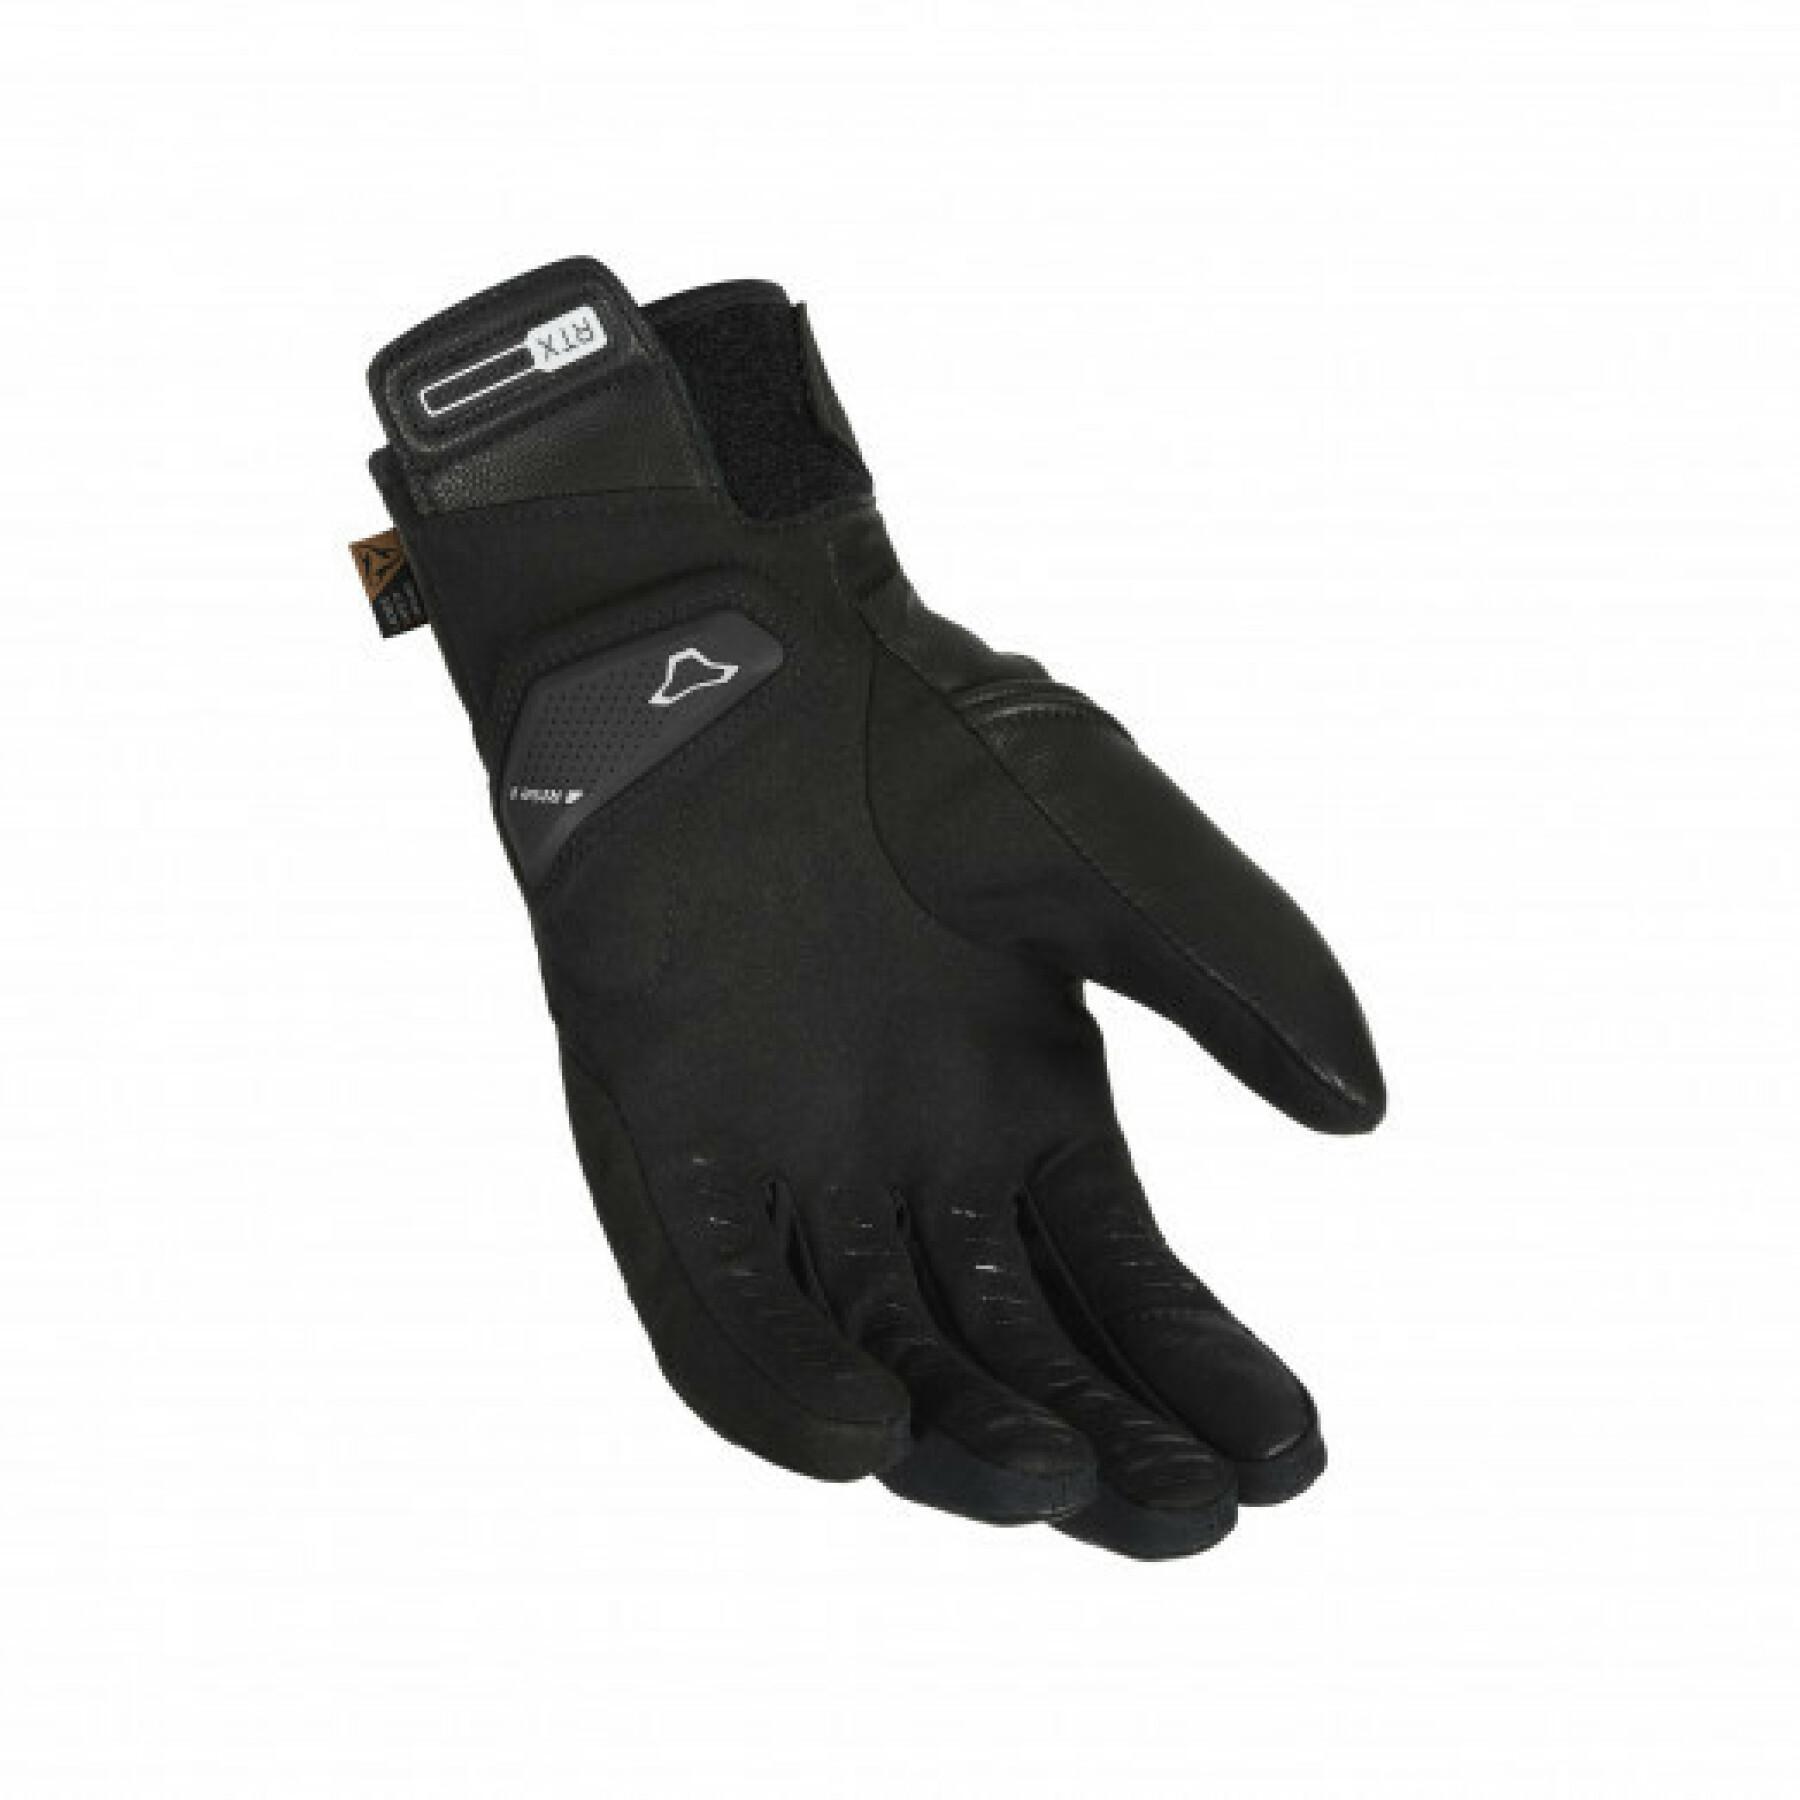 Heated motorcycle gloves Macna drizzle